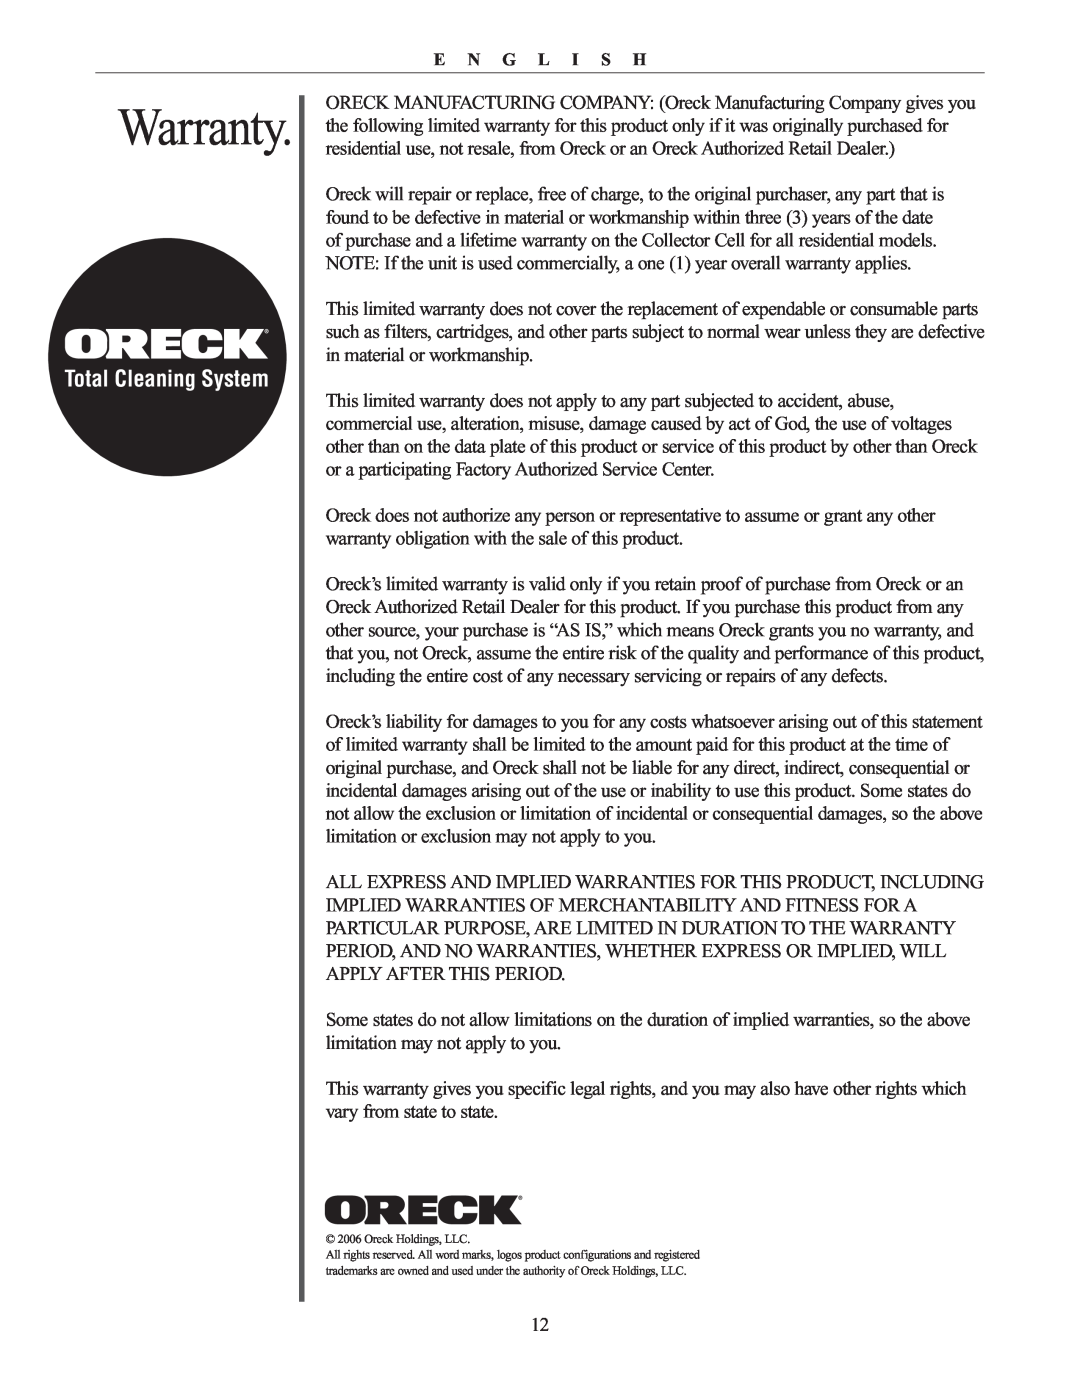 Oreck AIRP Series manual Warranty, Total Cleaning System 